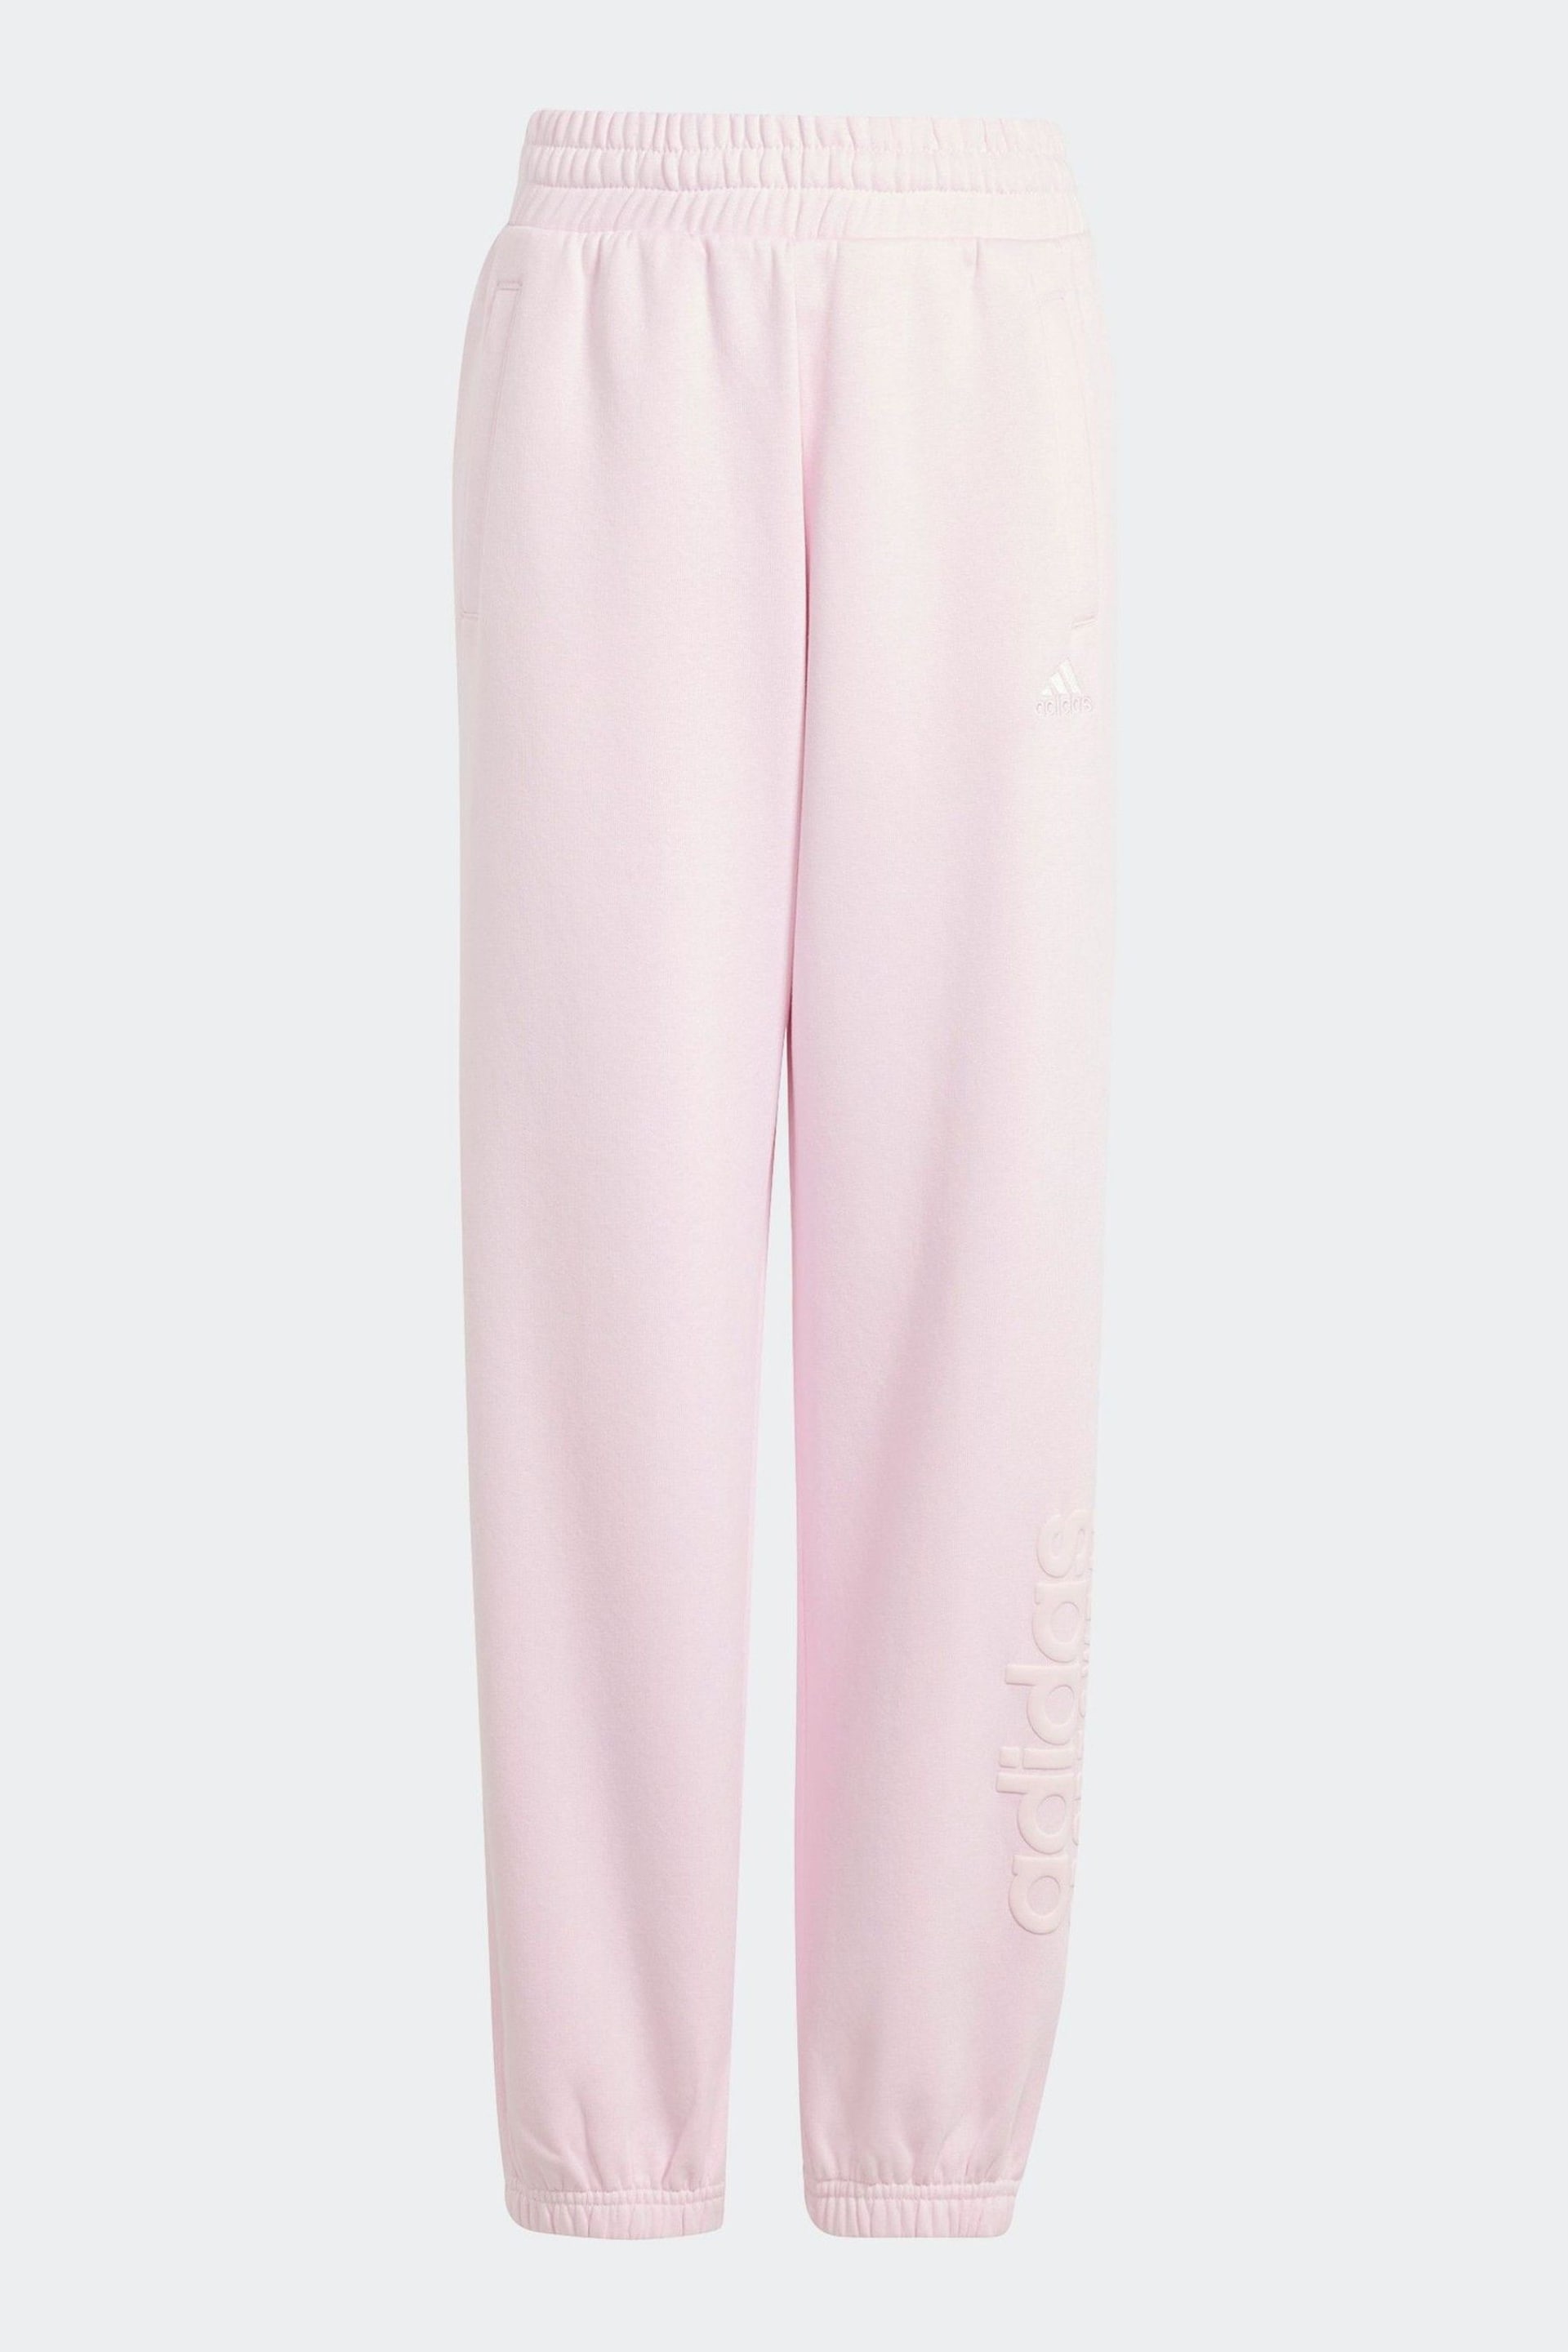 adidas Pink Kids Sportswear All Szn Graphic Joggers - Image 1 of 5